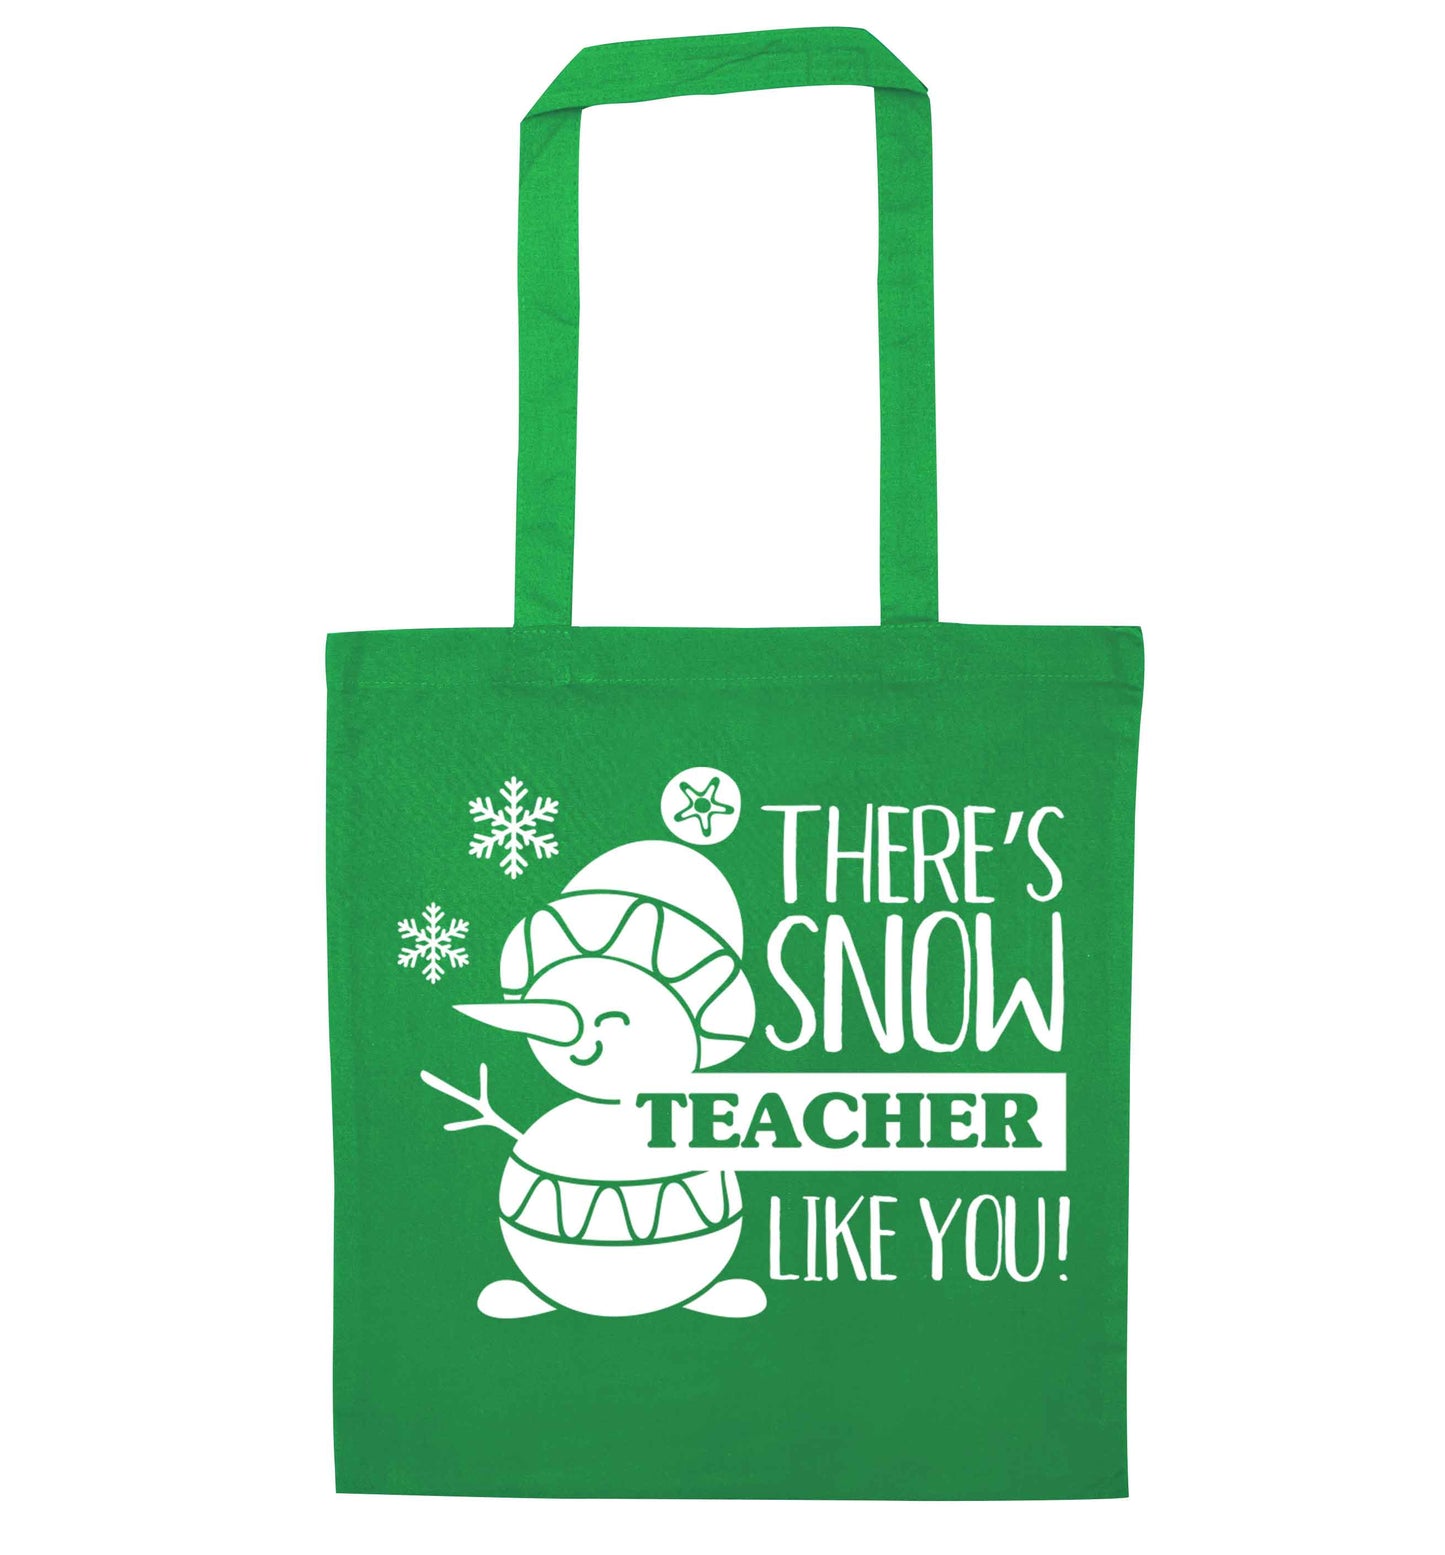 There's snow teacher like you green tote bag